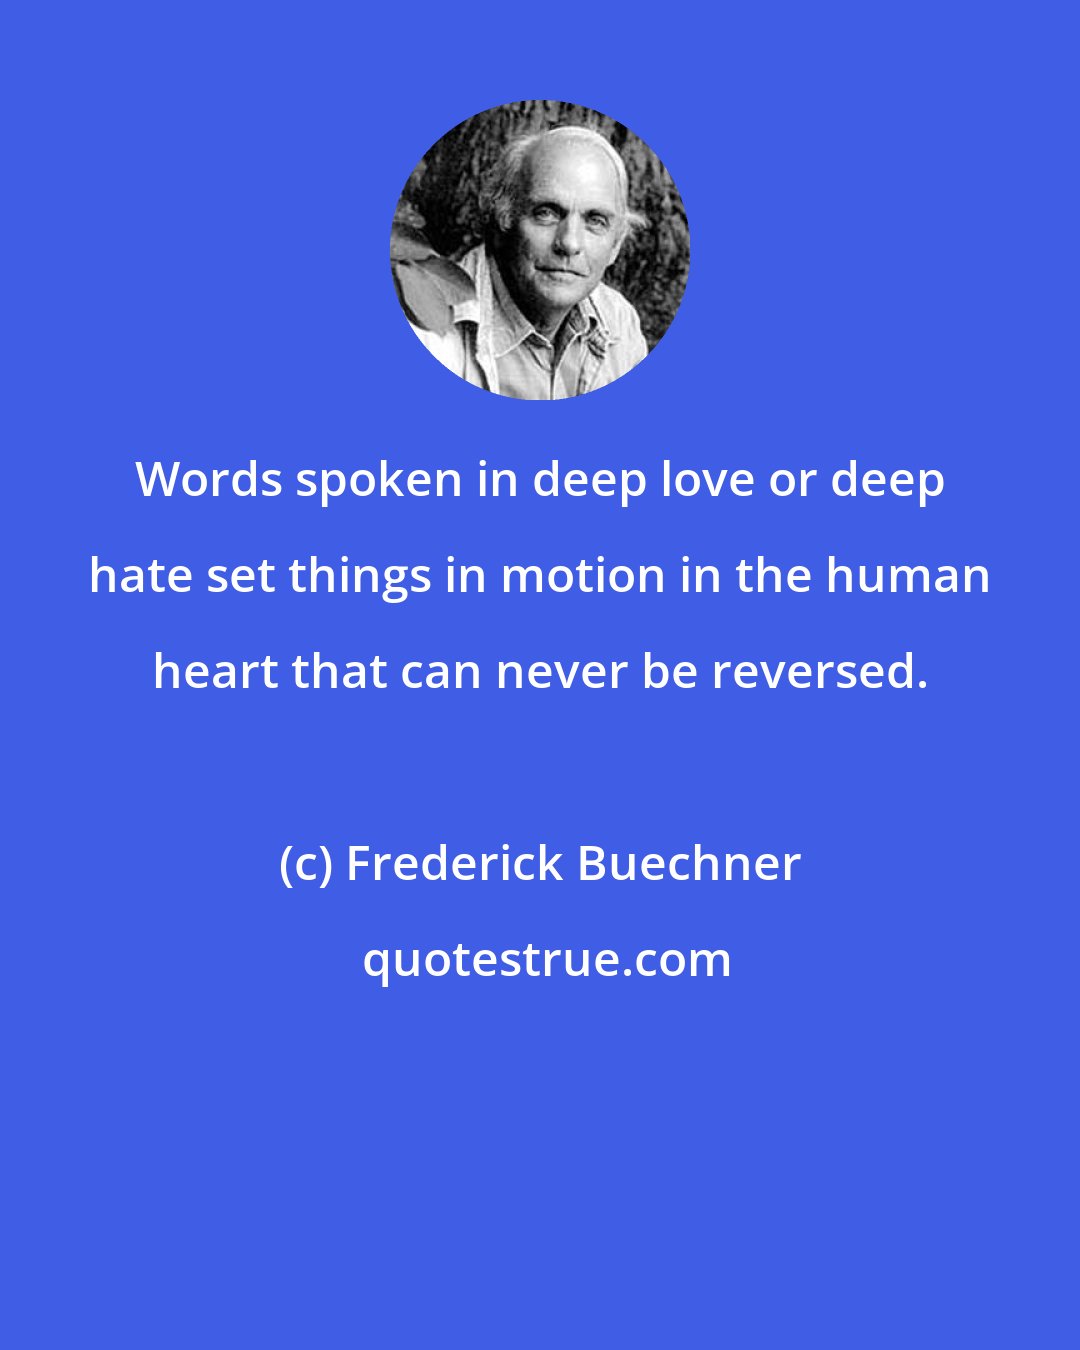 Frederick Buechner: Words spoken in deep love or deep hate set things in motion in the human heart that can never be reversed.